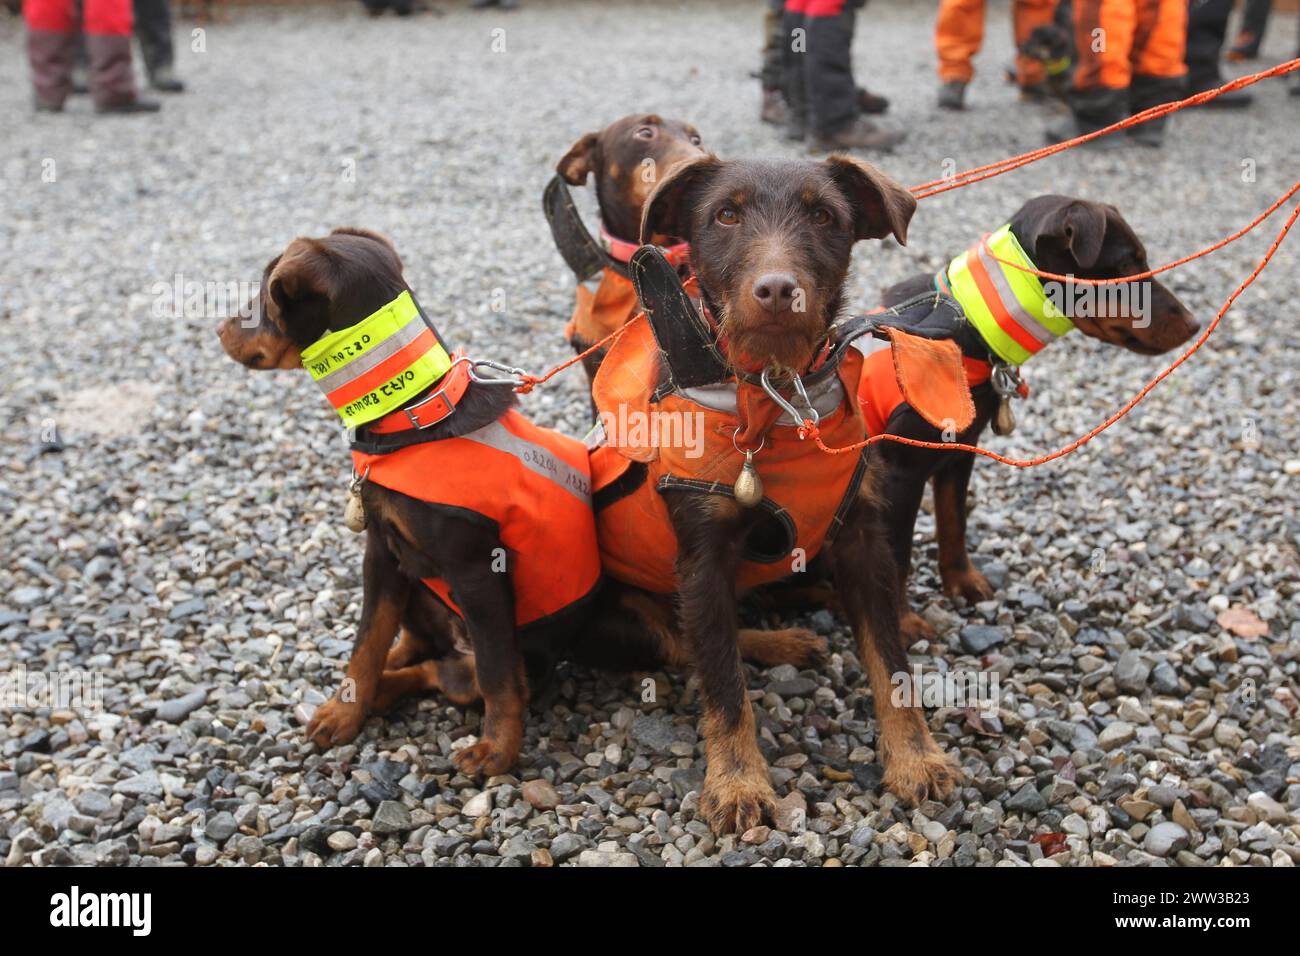 Hunting dogs, hunting terriers with safety waistcoats in front of the start of the hunt for sows (Sus scrofa), Allgaeu, Bavaria, Germany Stock Photo